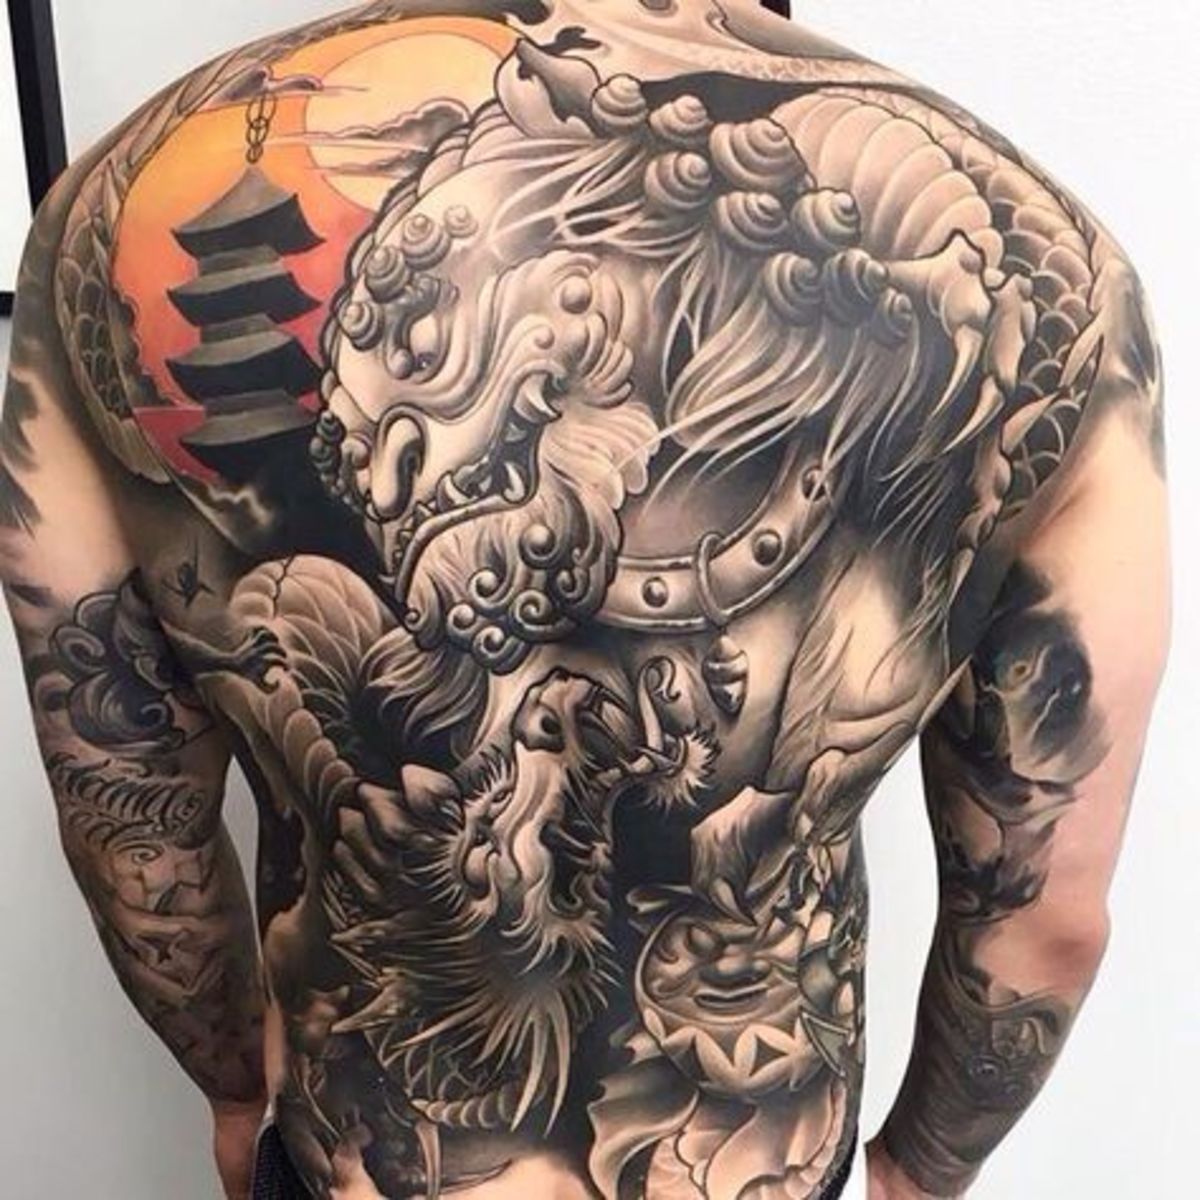 Japanese Temple Tattoos: Meanings, Symbolism & More